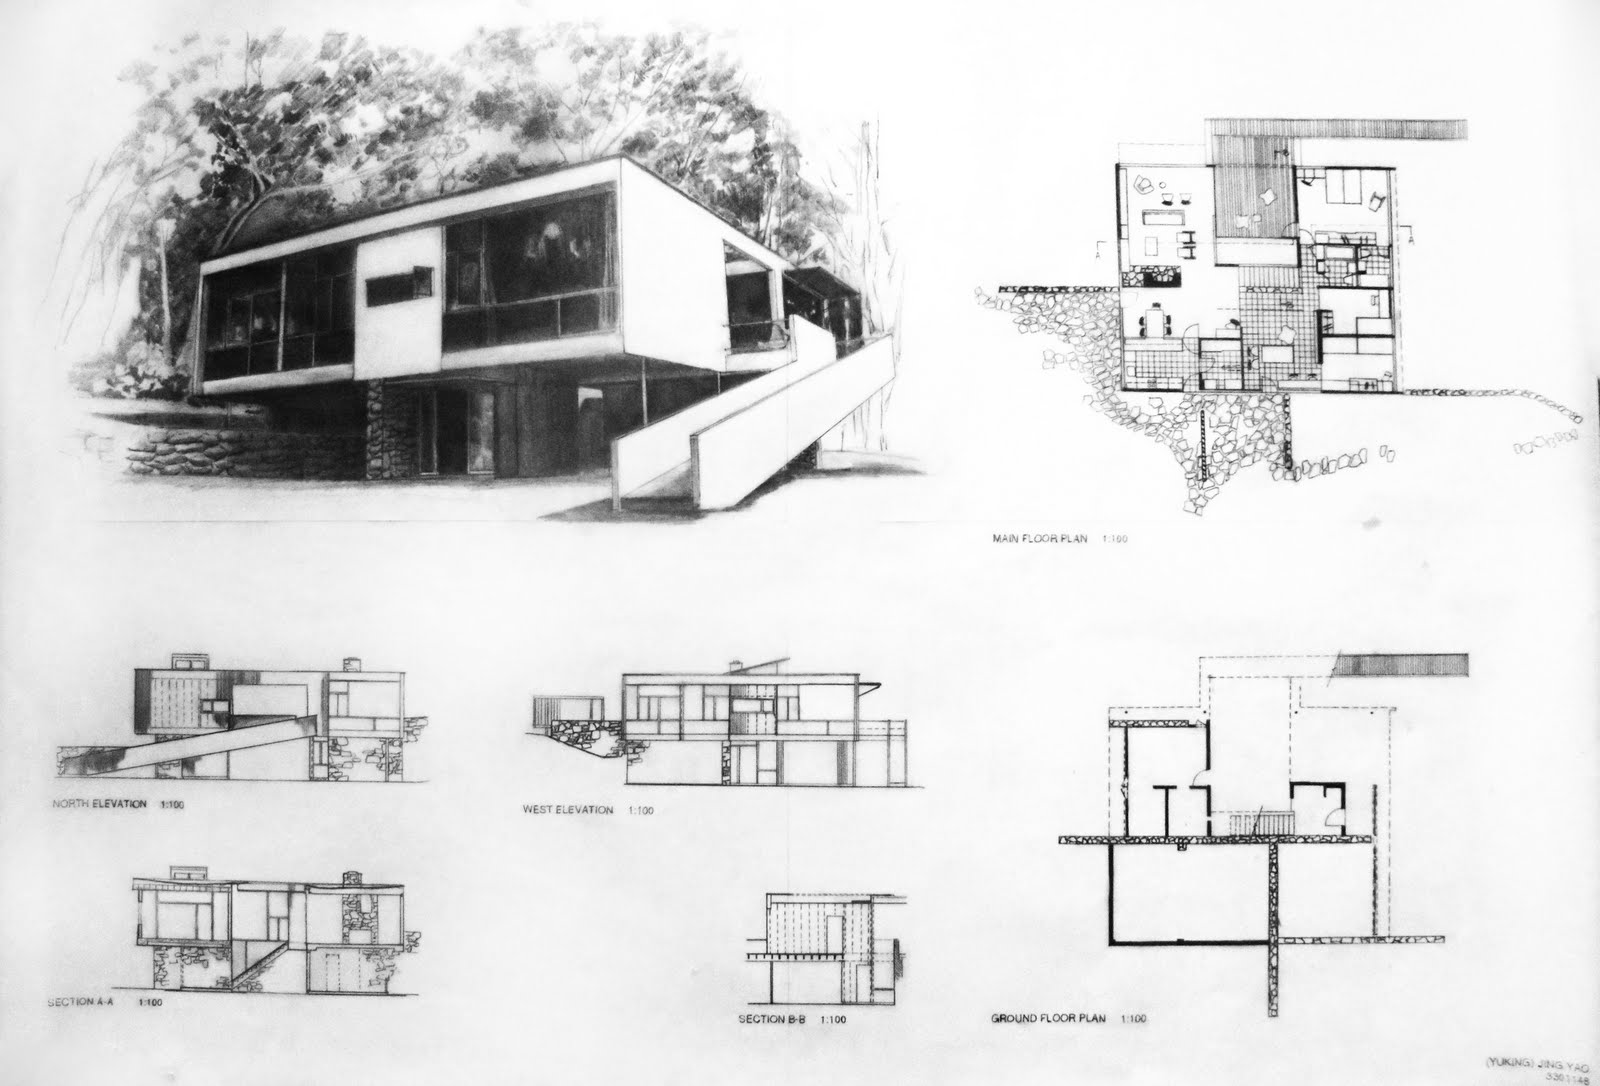 Yuking Yao: ARCH 1142-COMMUNICATION- Workshop1 architectural drawing